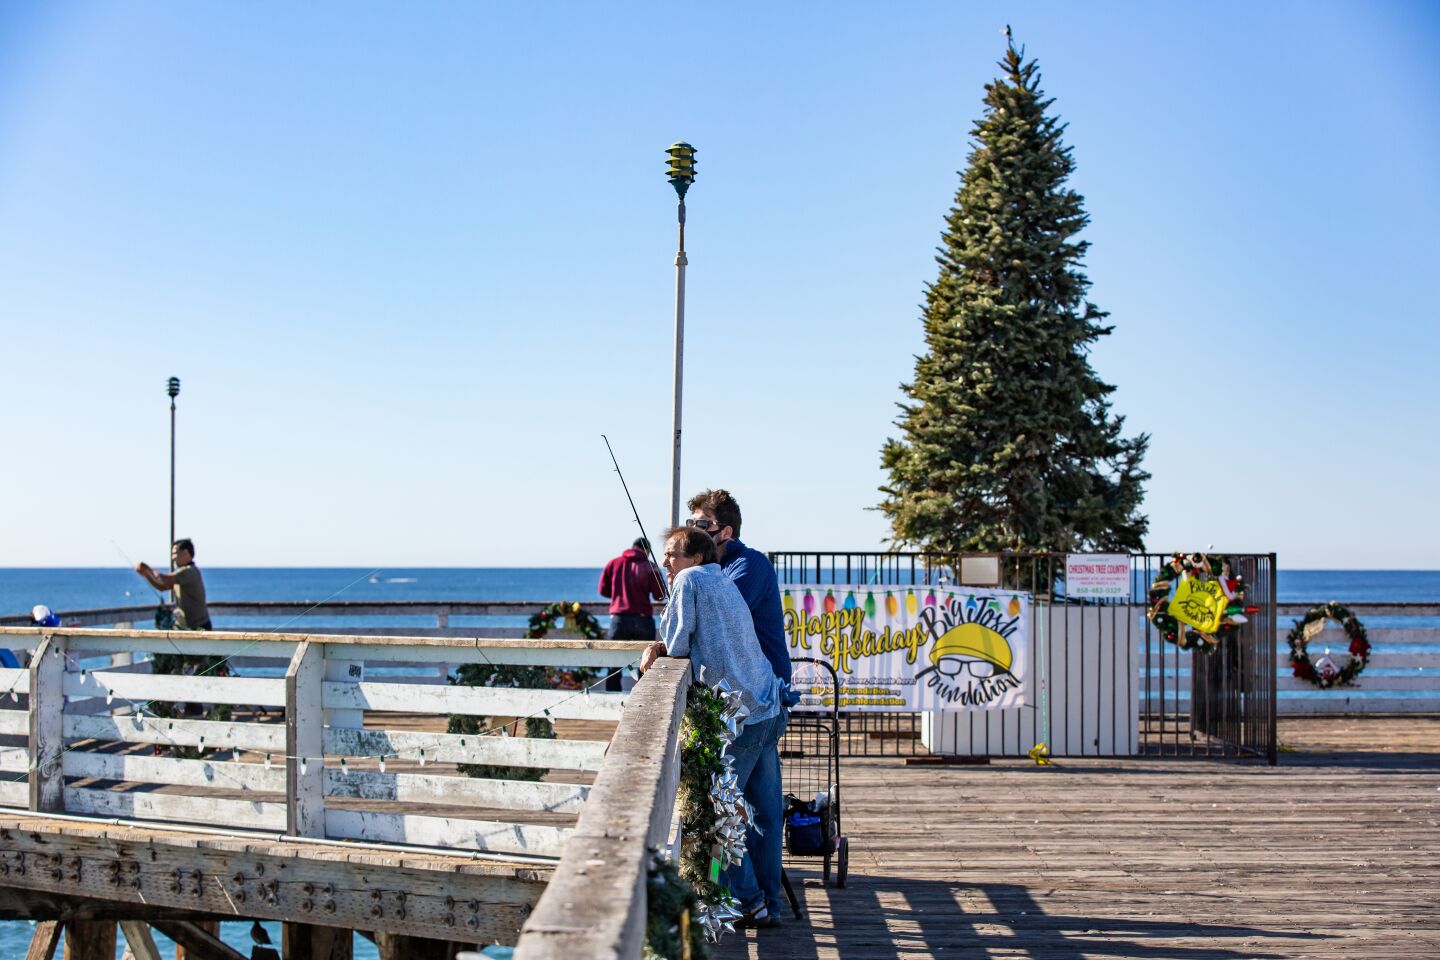 Fisherman David Storch and David Storch, Sr. spend the day at the festive Crystal Pier in Pacific Beach.